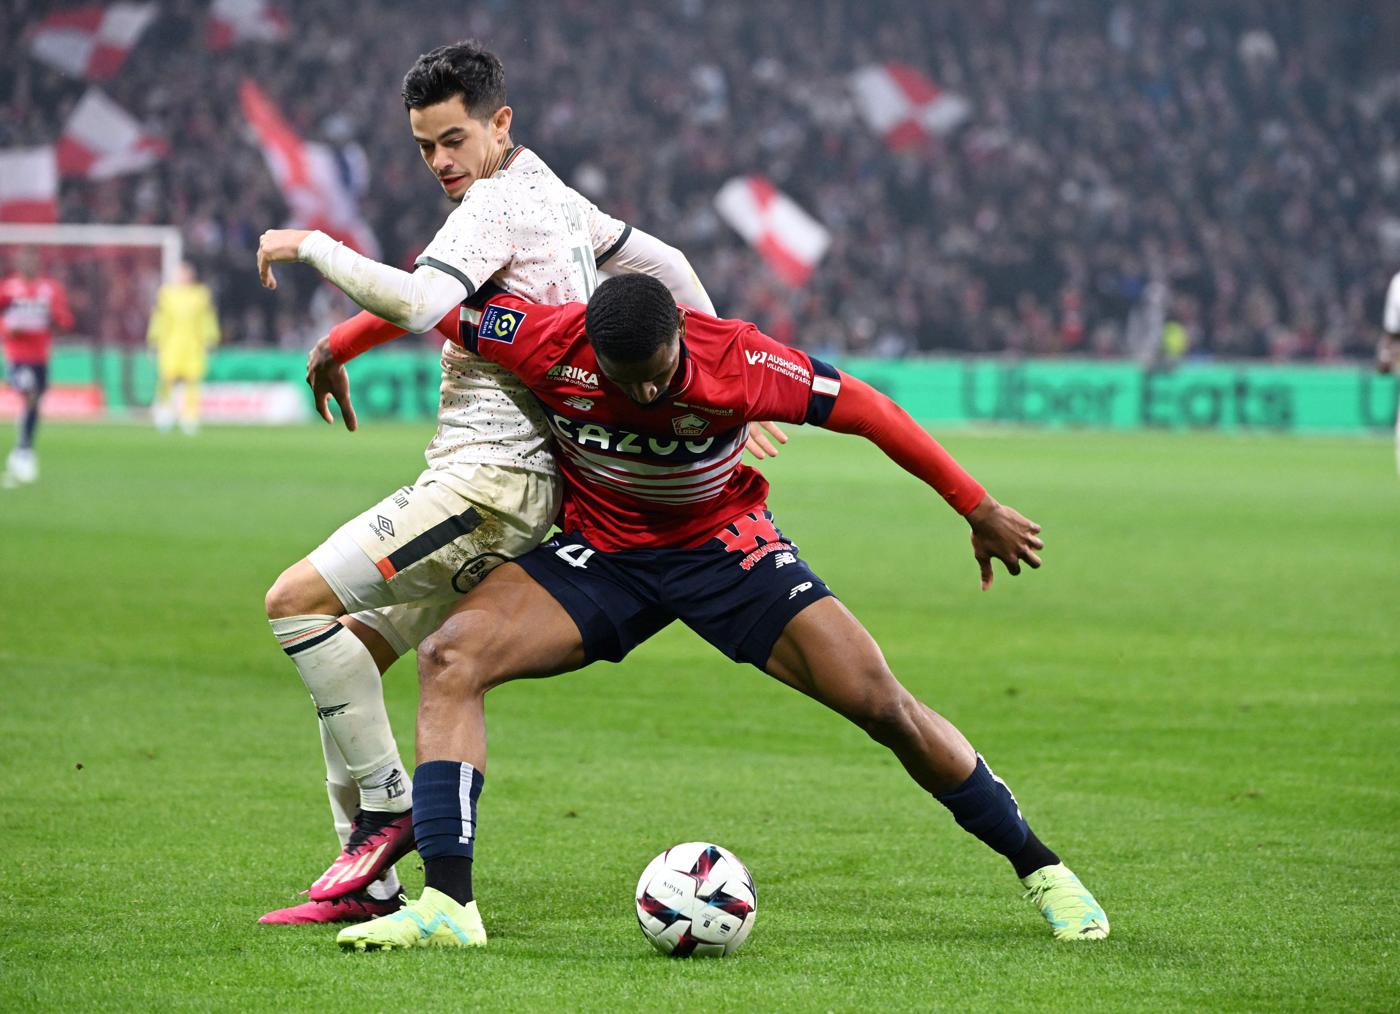 Lille - Lorient - 3:1. French Championship, 29th round. Match review, statistics